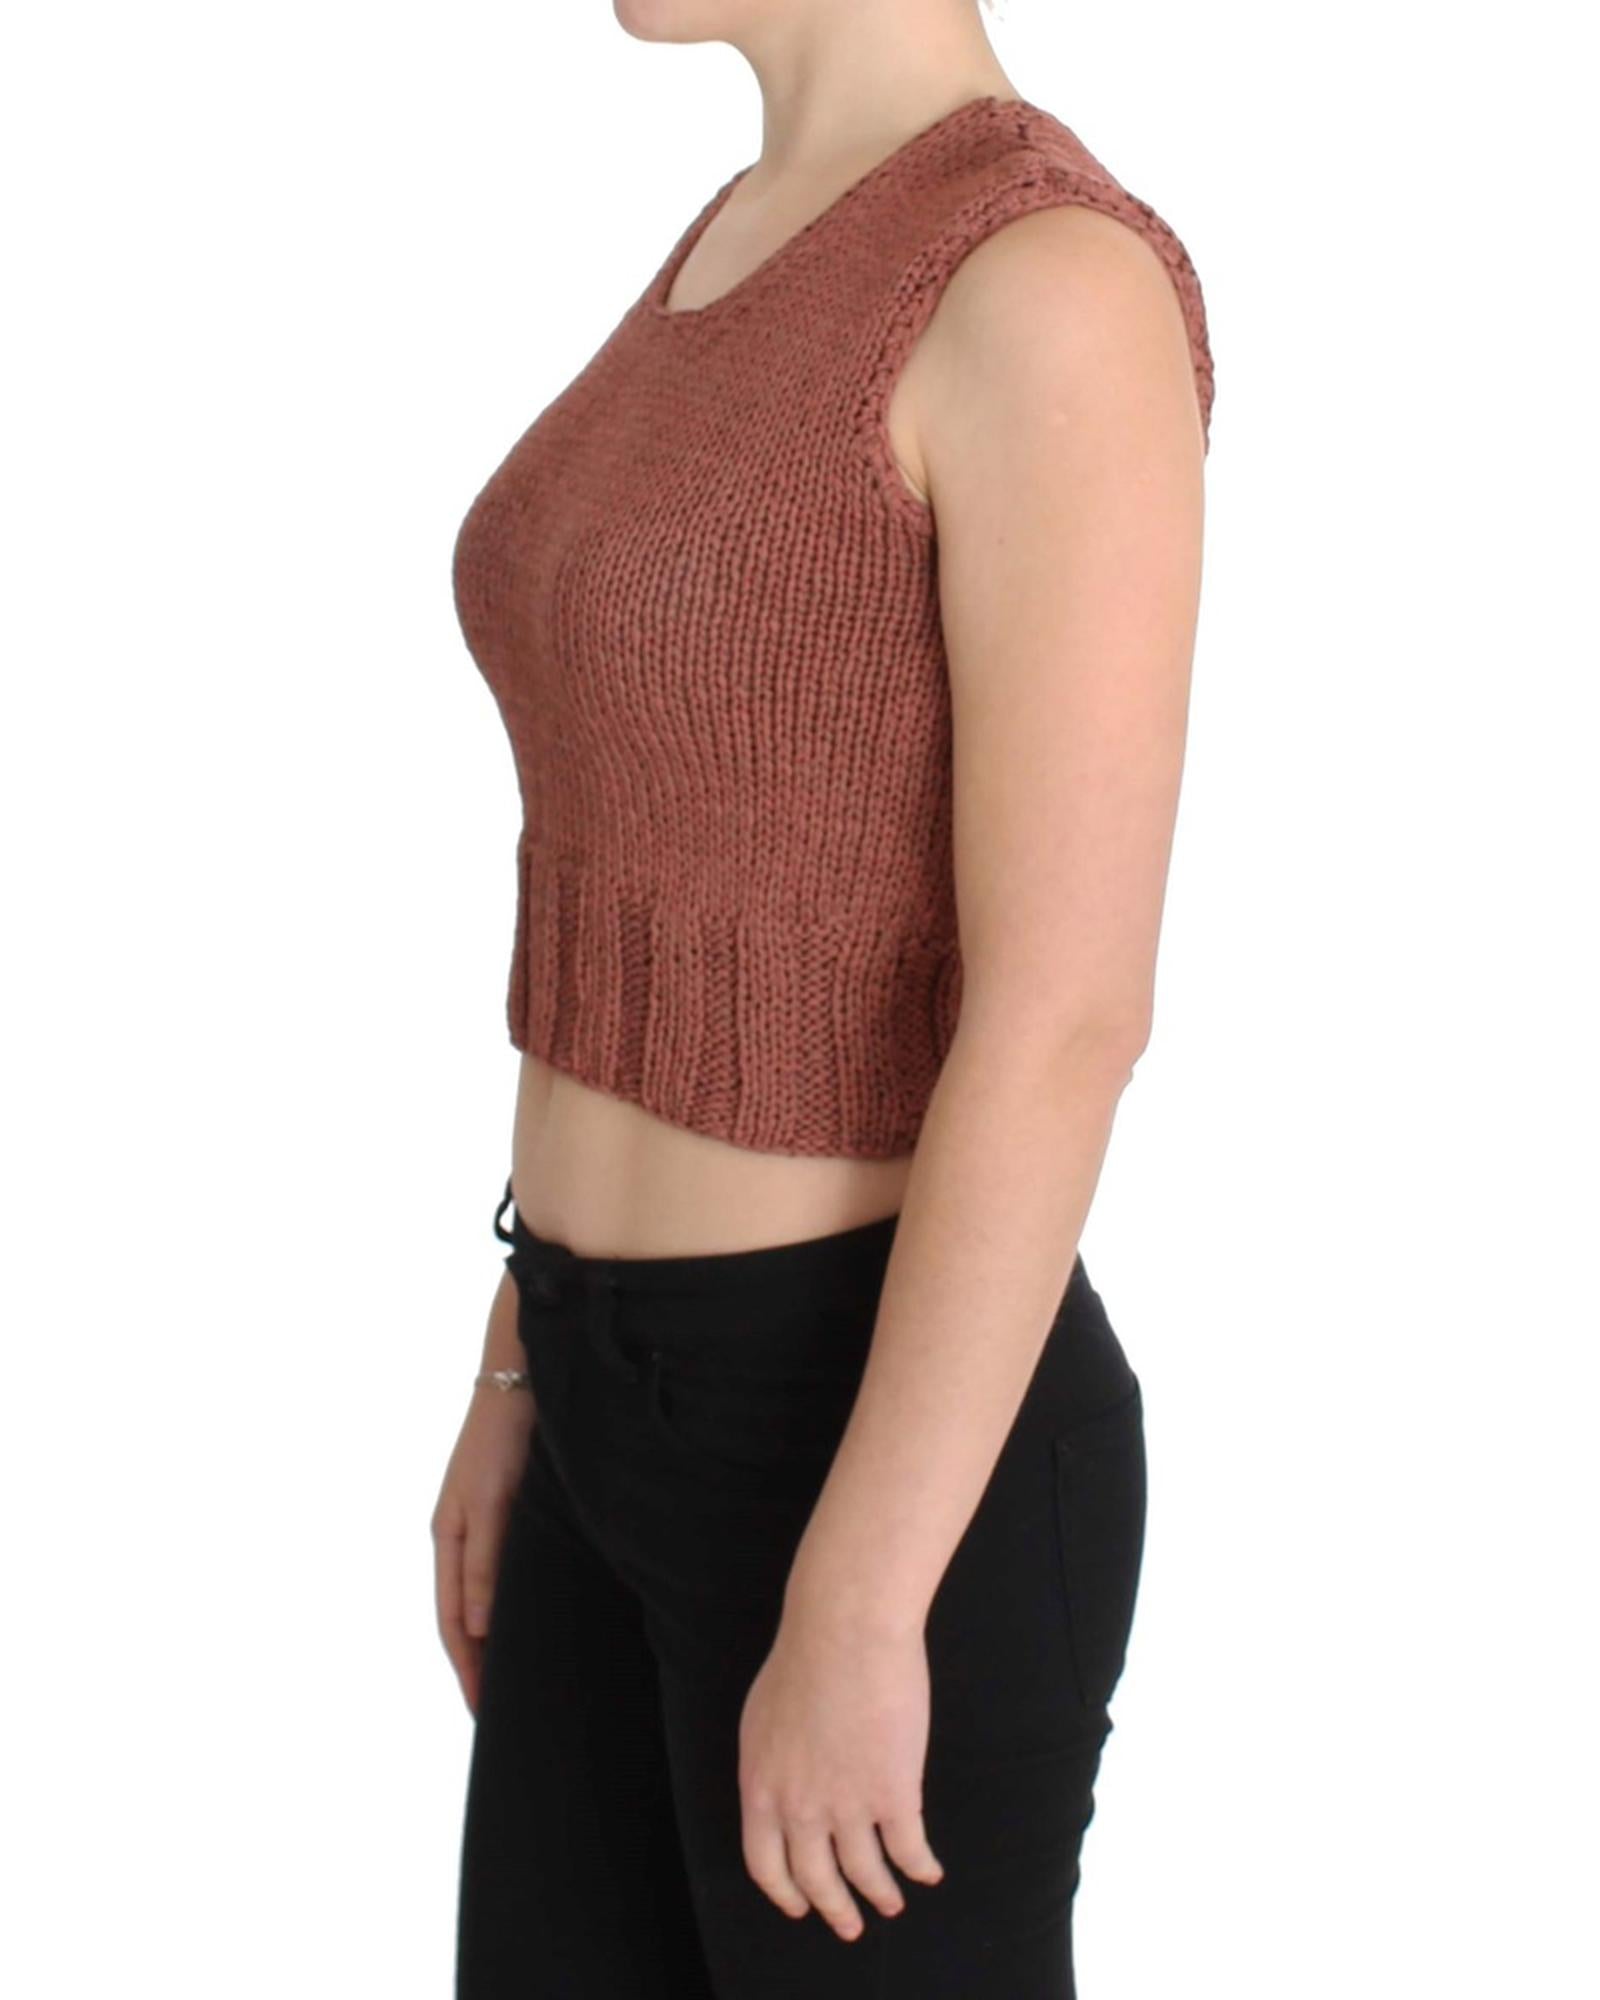 Red Knitted Cotton Blend Vest Sweater One Size Women